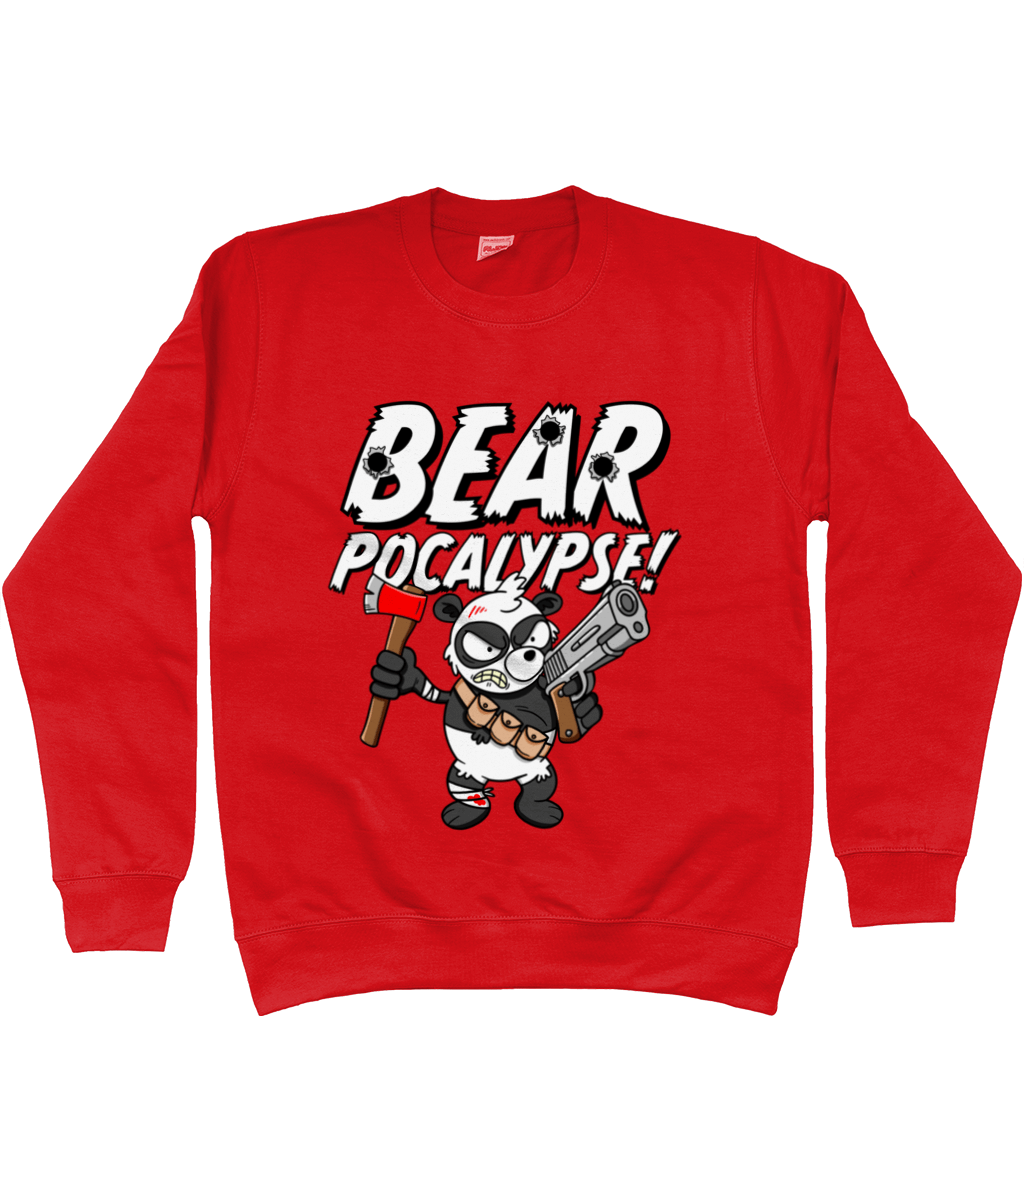 Red sweatshirt with white bold text reading Bearpocalypse! with a Panda armed with a hand gun and an axe.